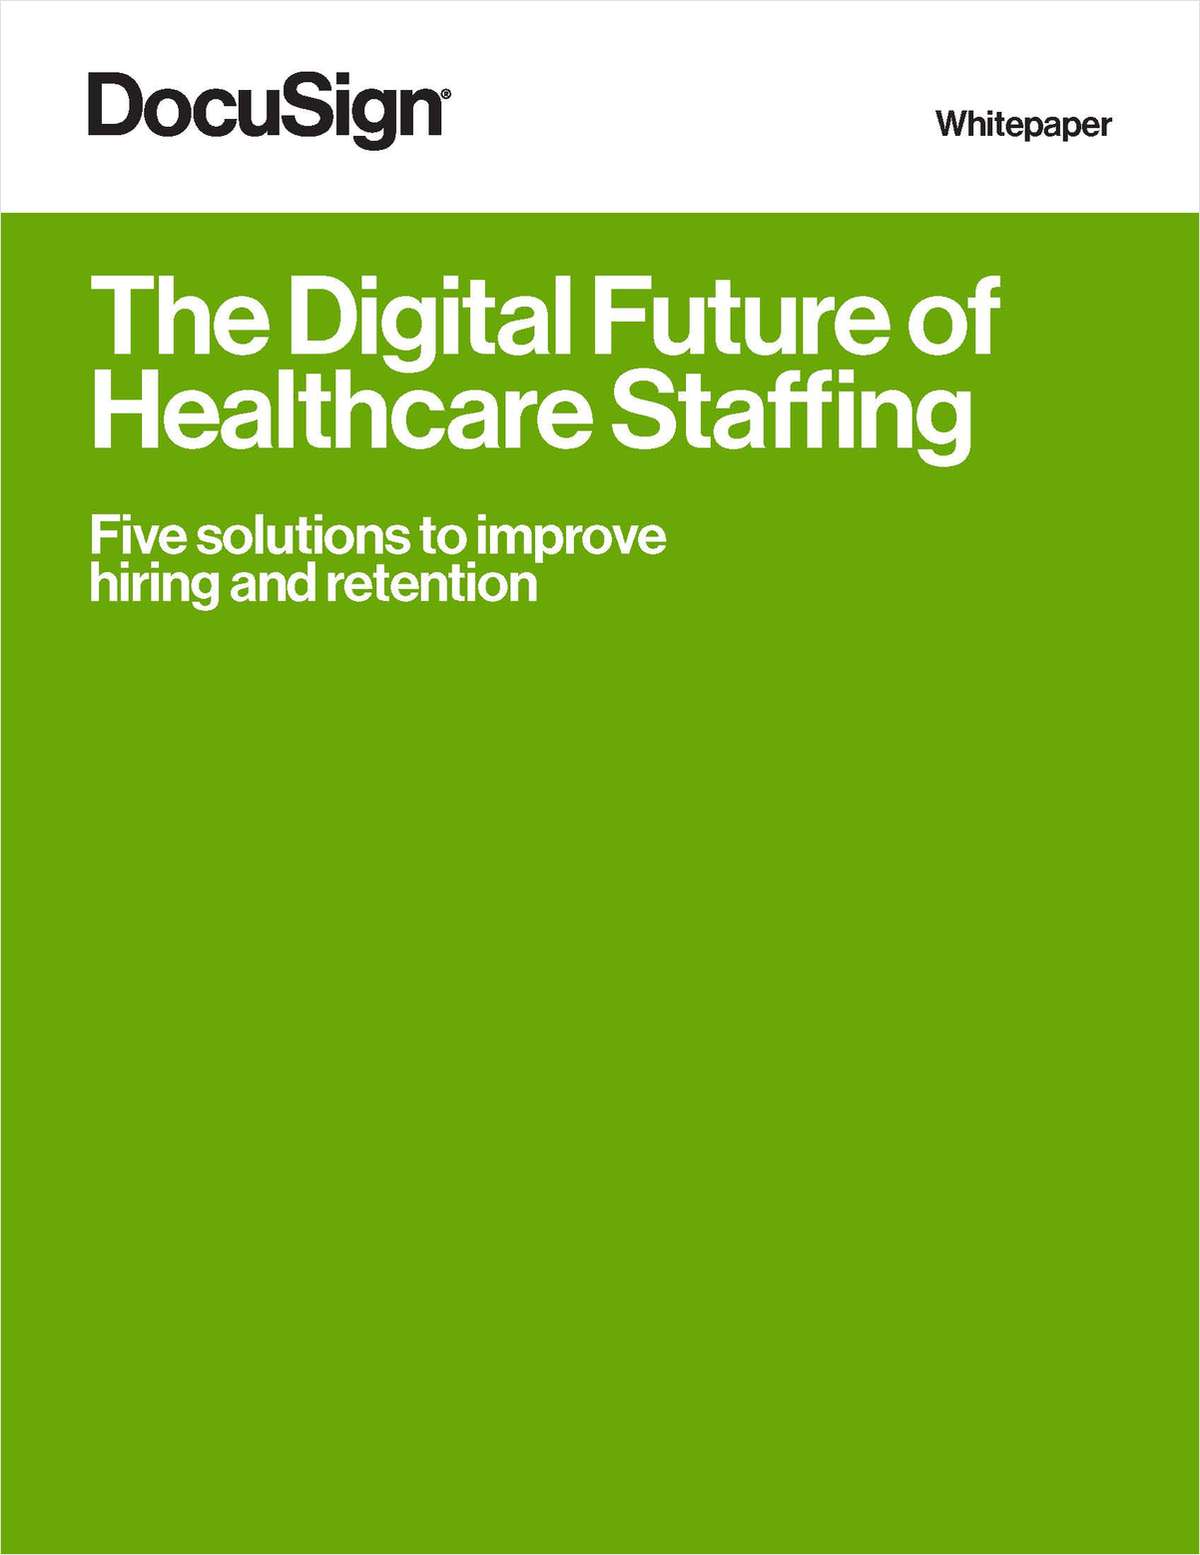 The Digital Future of Healthcare Staffing: 5 Solutions to Improve Hiring and Retention